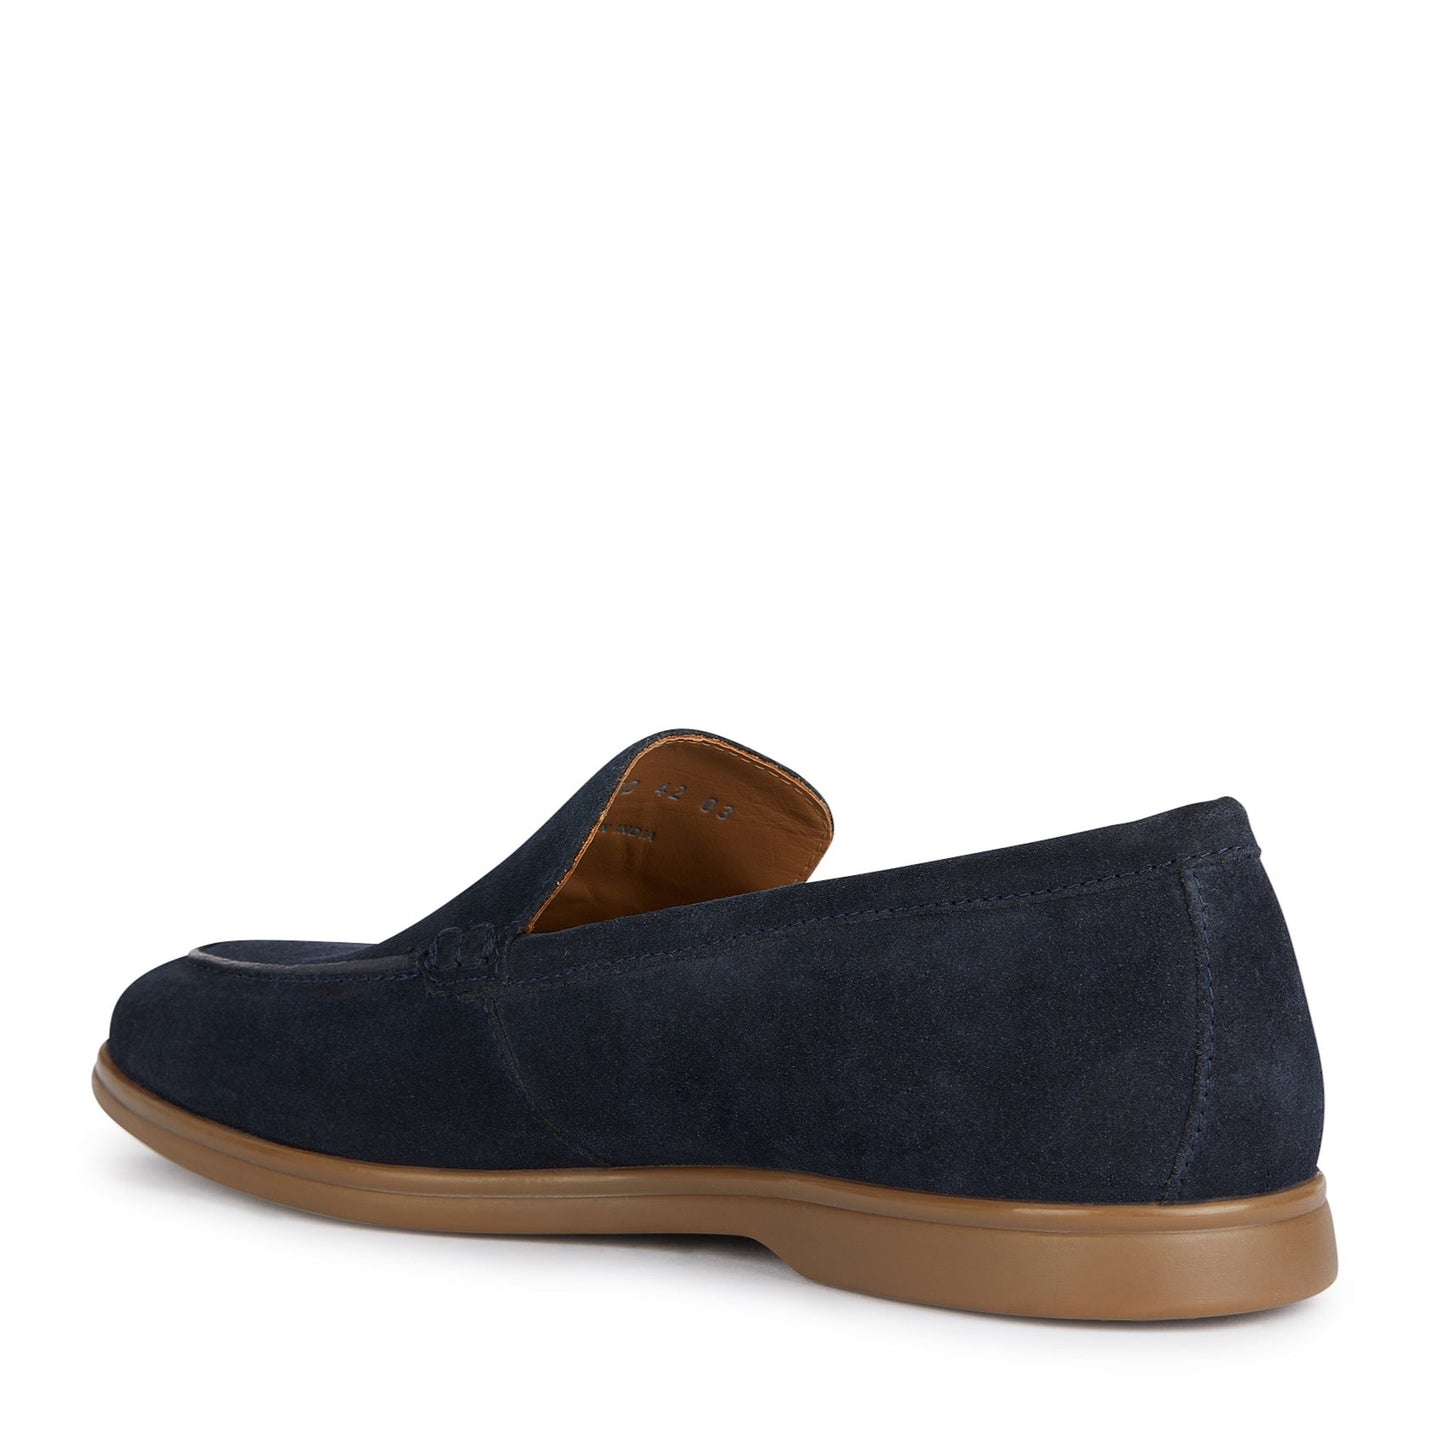 Geox Venzone Suede Moccasins - Navy